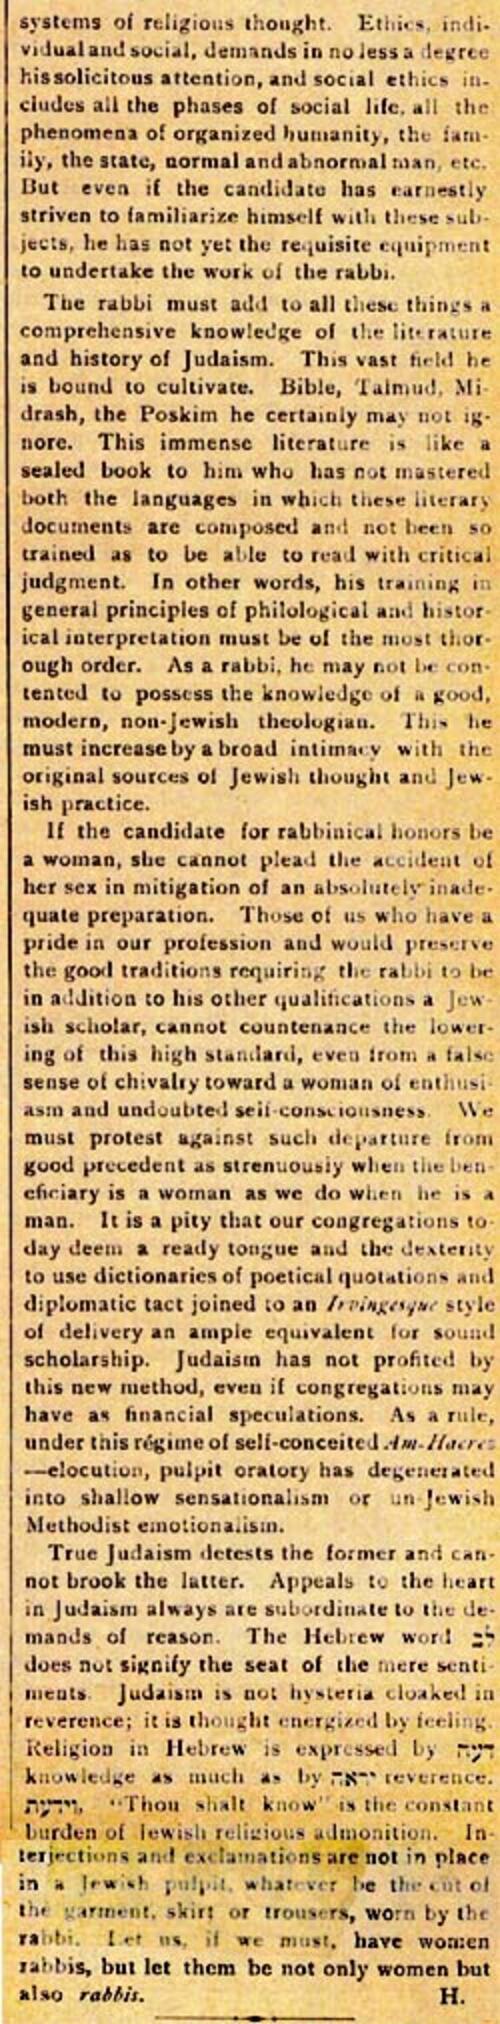 Editorial on Woman on the Pulpit from "The Reform Advocate," November 11, 1893, Page 3